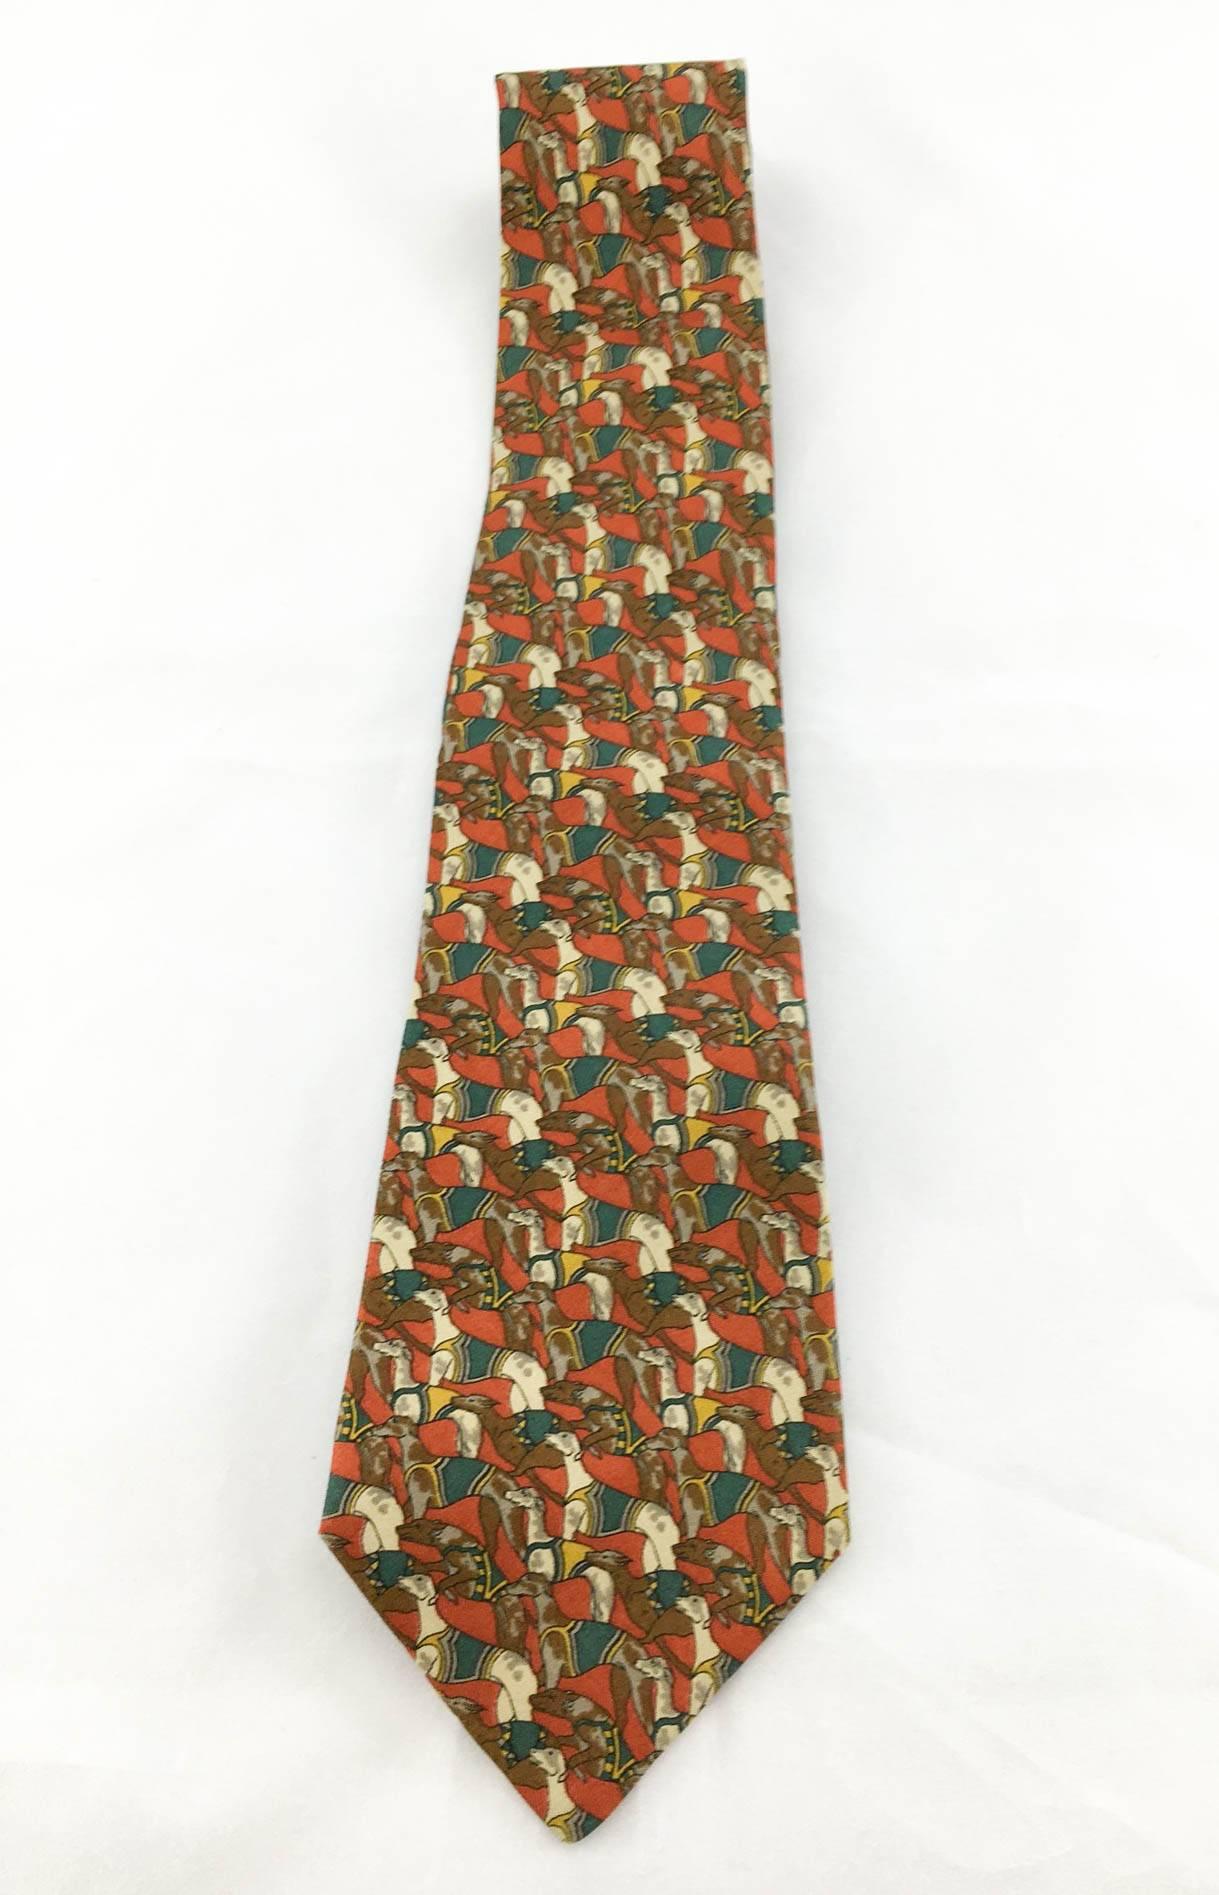 Elegant Salvatore Ferragamo ‘Racing Dogs’ Silk Tie. It features a great print of different racing dogs in different positions on a burnt red background. Perfect for dog lovers, this gorgeous tie will add quirkiness and character to any look.